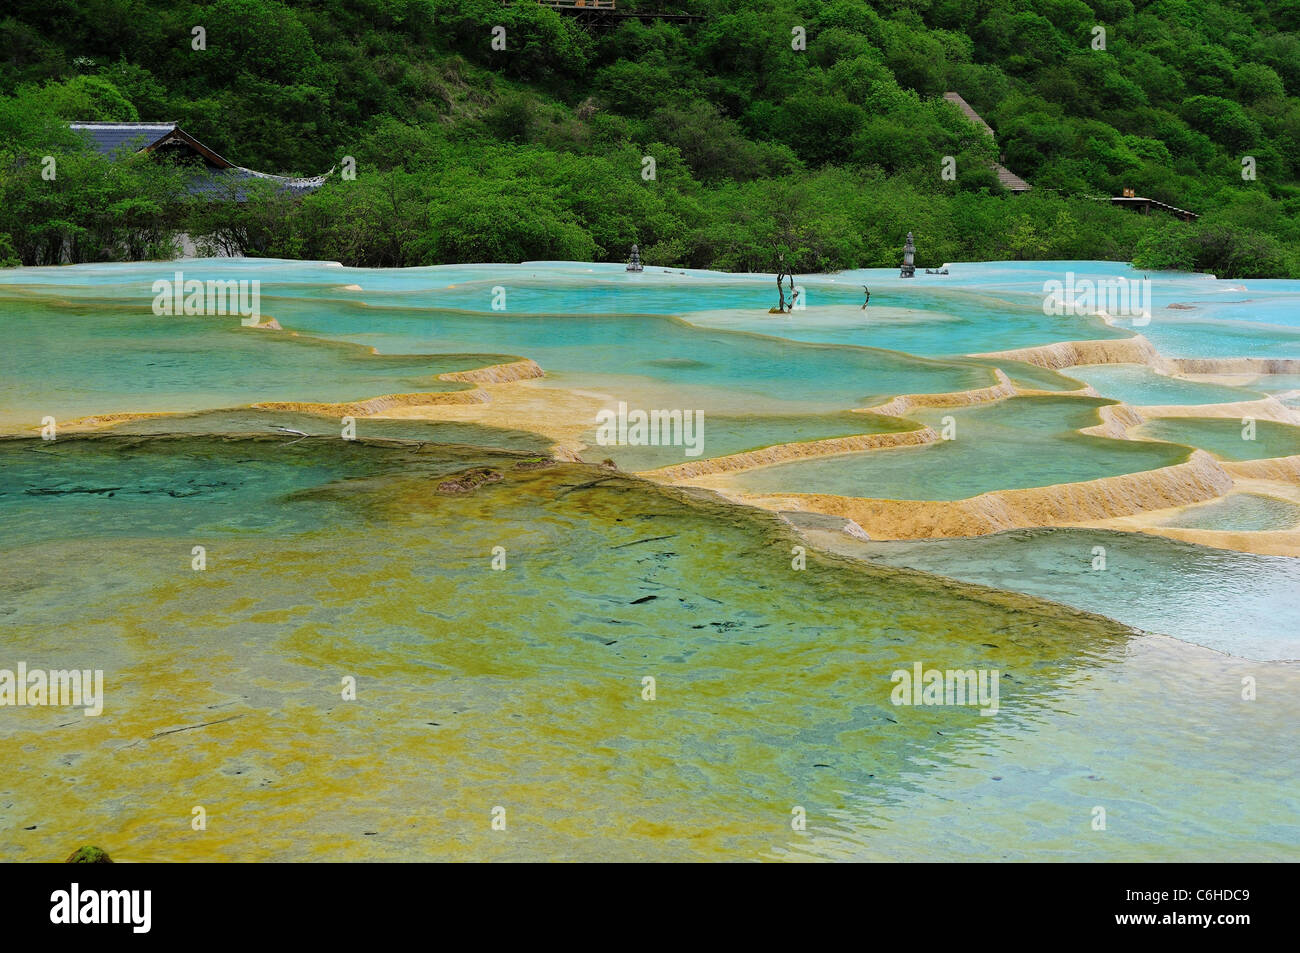 Travertine terrace pools at Huanglong Nature Reserve, an UNESCO World Heritage Site. Sichuan, China. Stock Photo